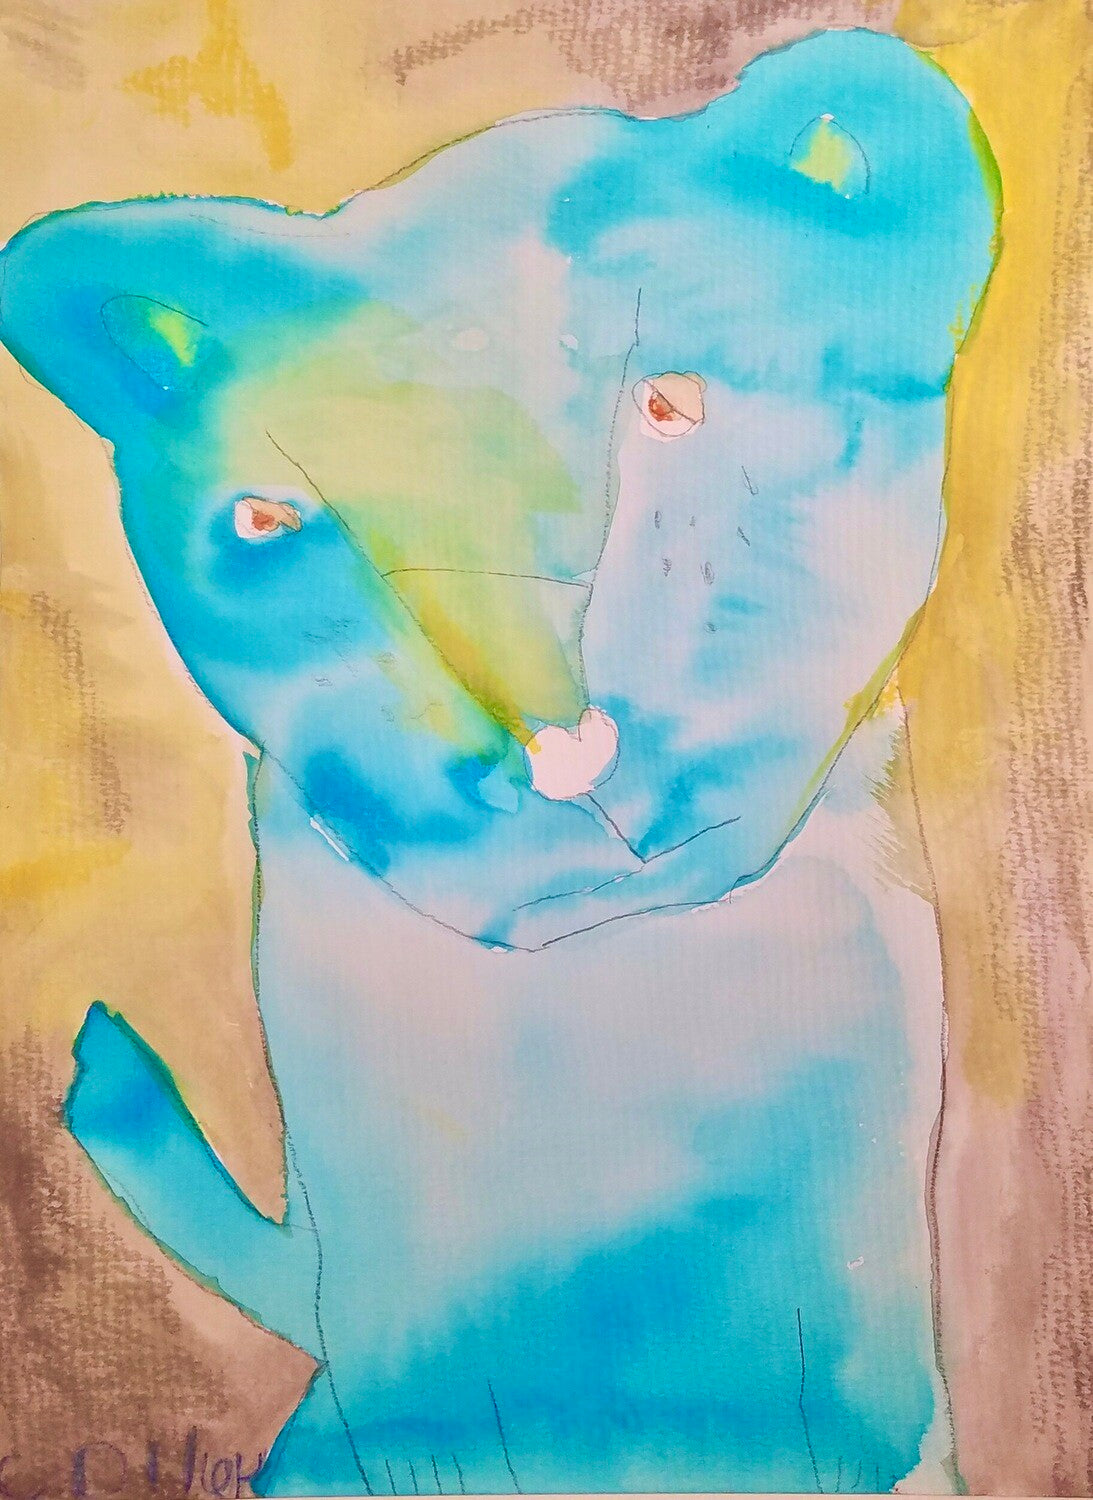 12” x 18” print on high quality paper. This is one of the first she made with eyelids. A blue and green cat on a yellow background. Signed on the front, bottom, left hand corner.